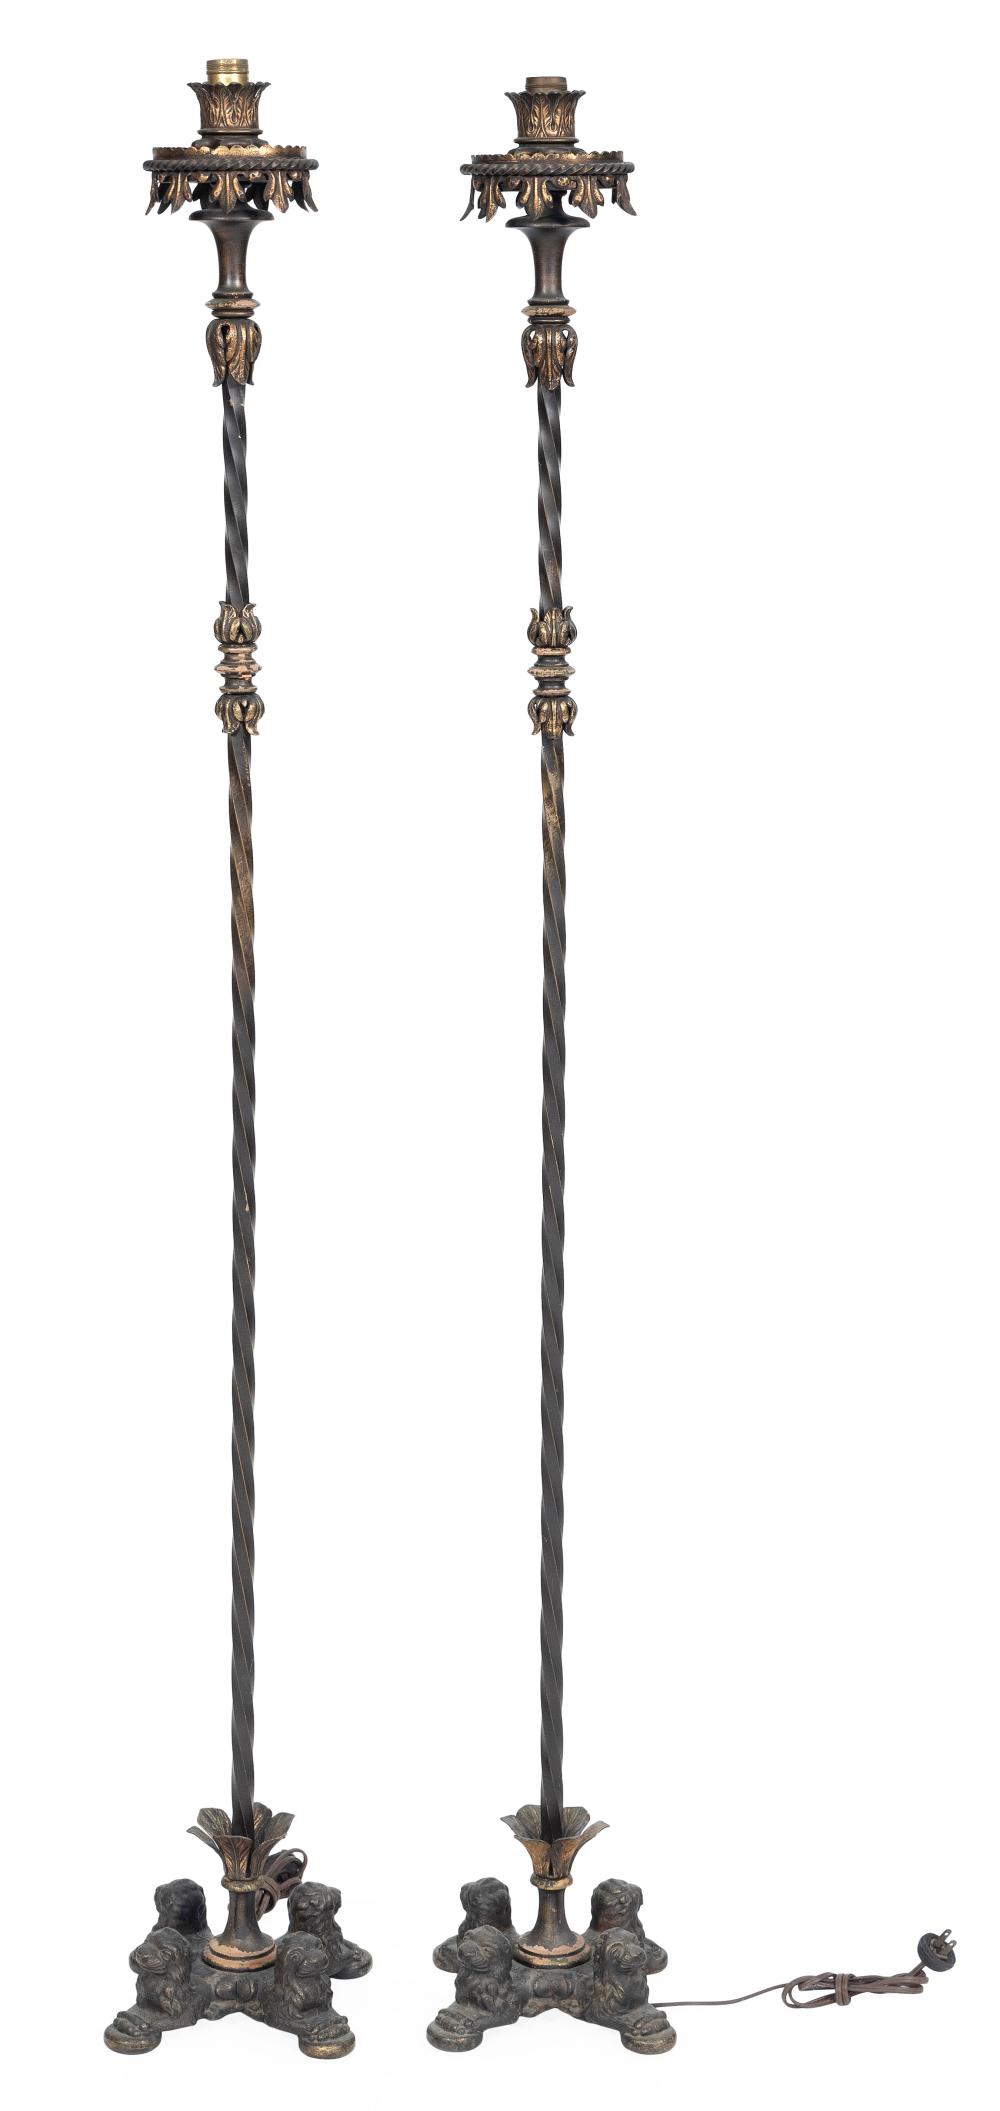 PAIR OF WROUGHT IRON FRENCH-STYLE